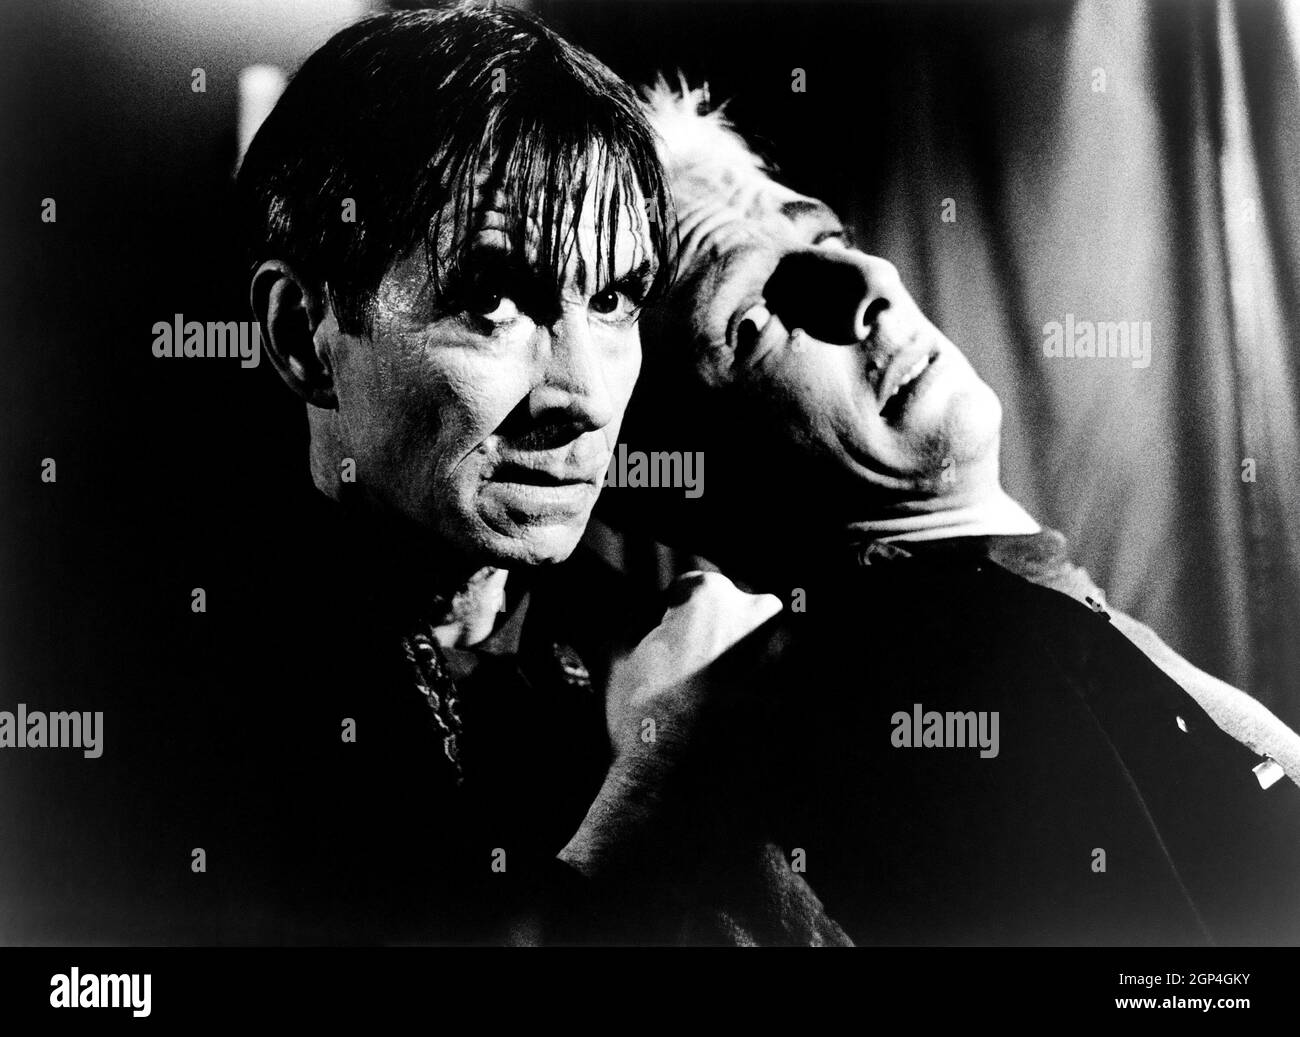 EDGE OF SANITY, from left, Anthony Perkins, Ben Cole, 1989. ©Millimeter ...